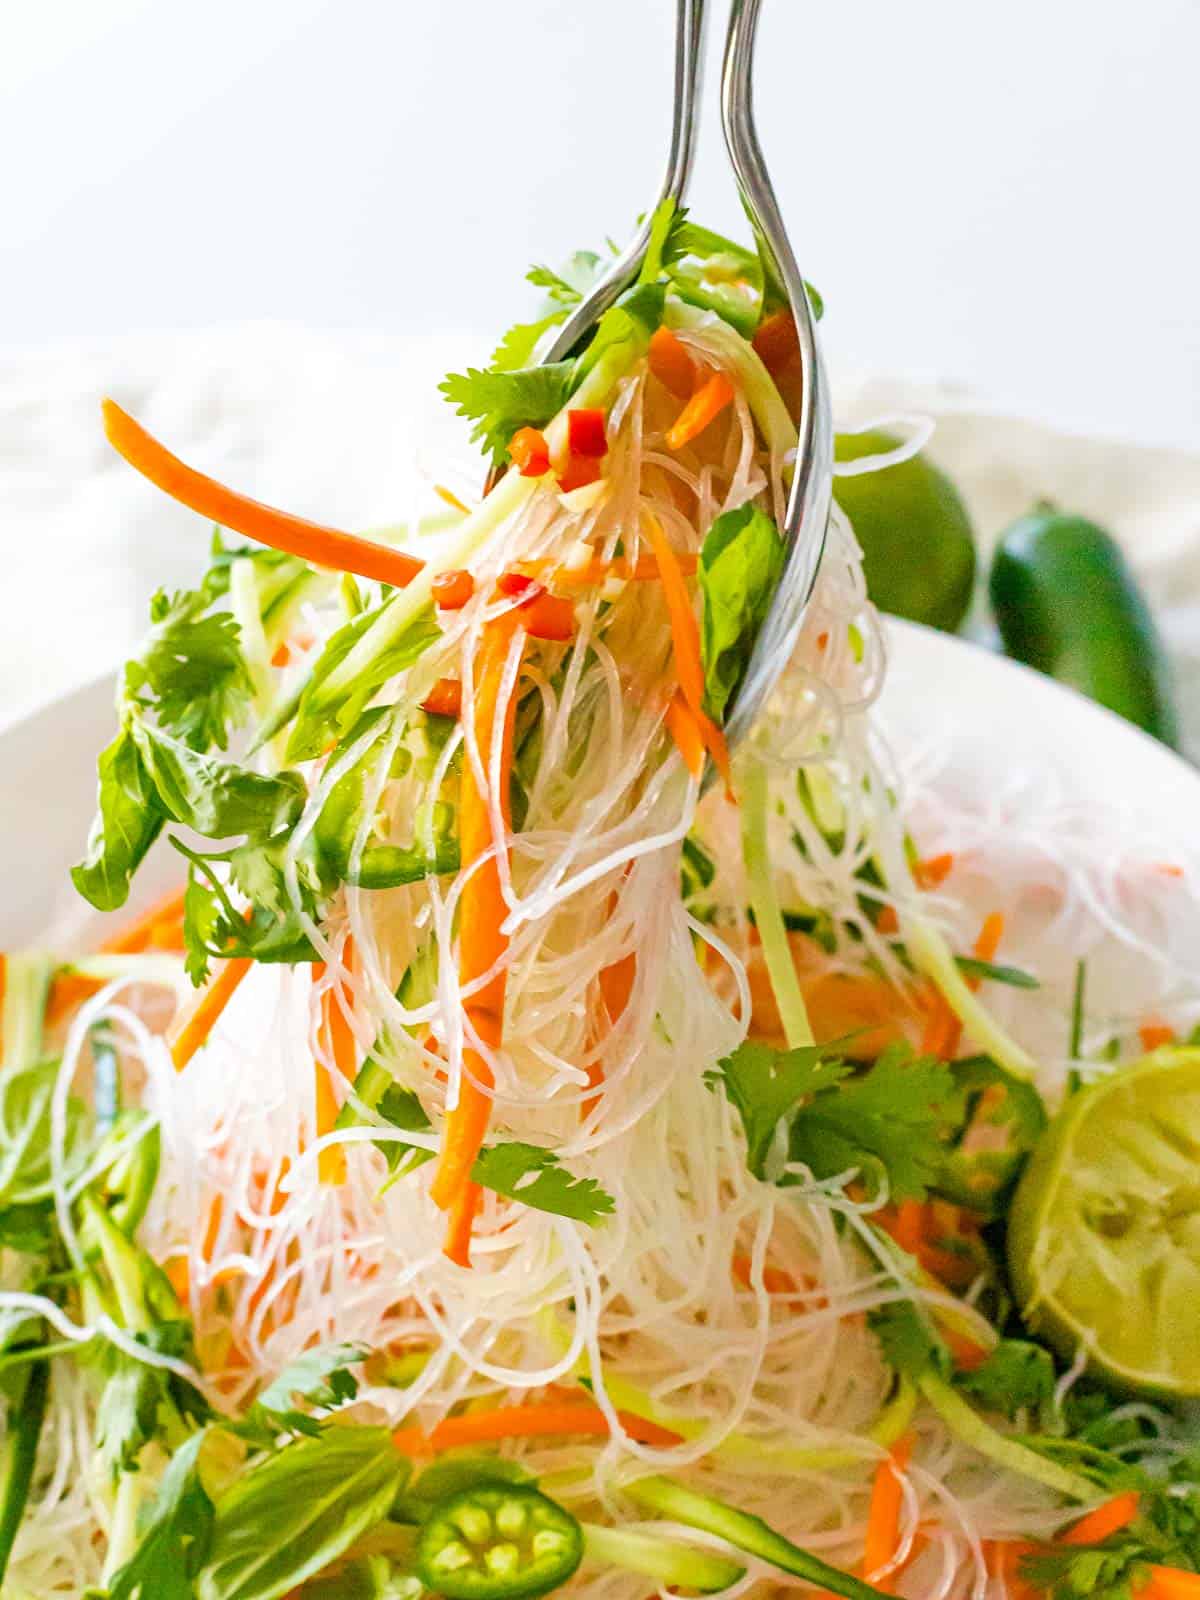 Vietnamese cold noodle salad with vermicelli rice noodles, basil, cilantro, carrots, and vegetables being served with silverware.